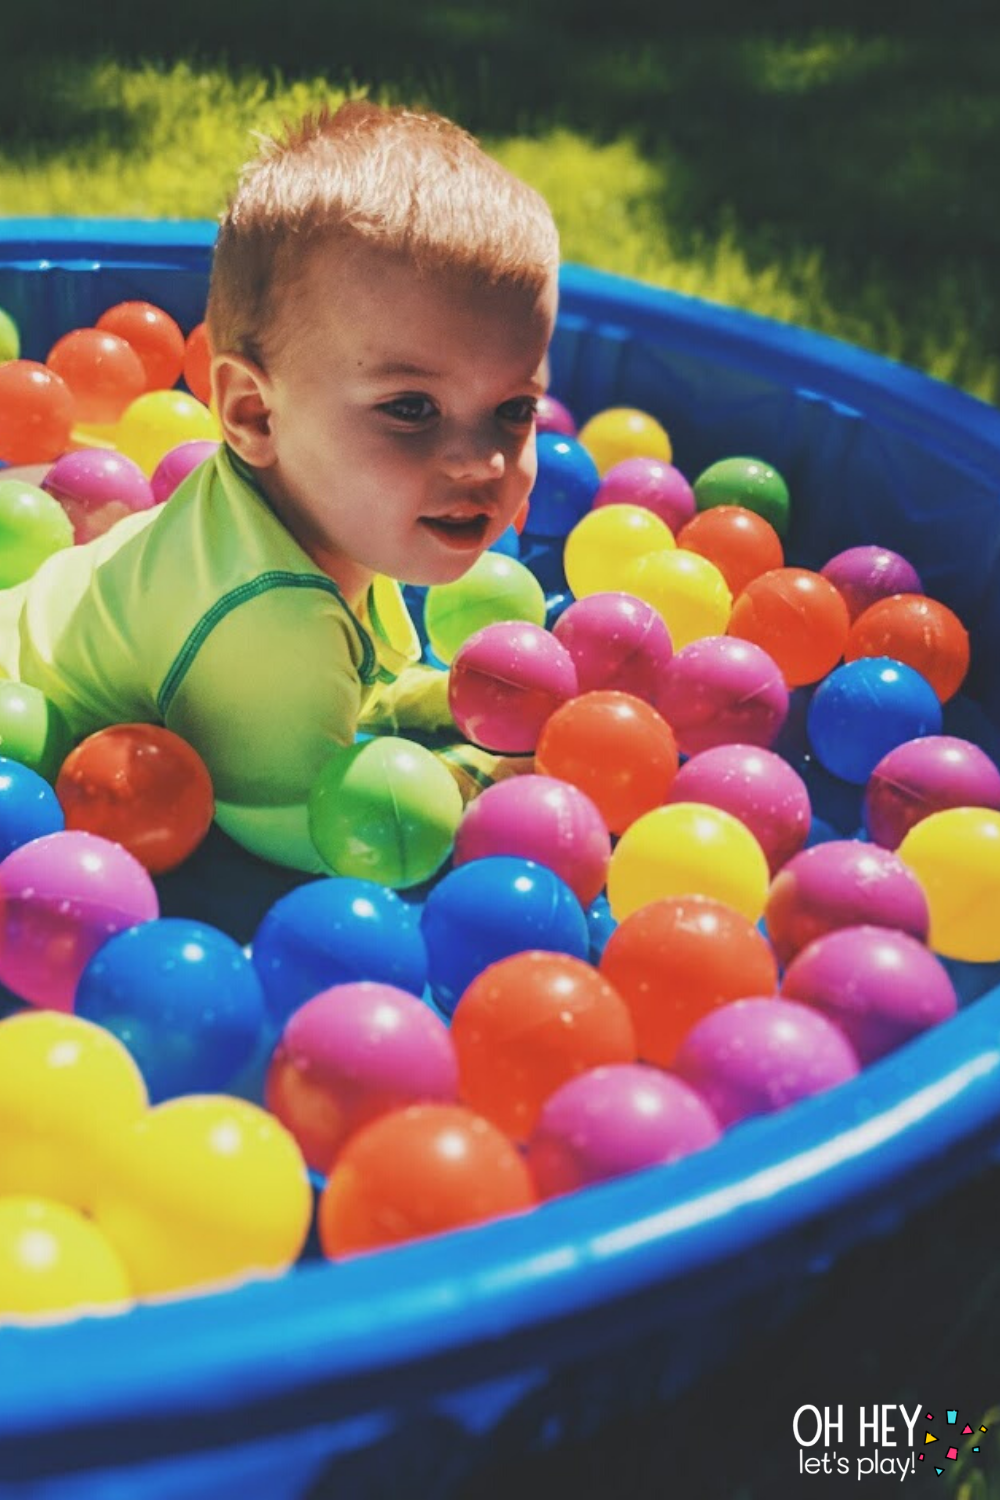 Balls in a Pool 2 30+ Activities for 1-2 Year Old Toddlers - Oh Hey Let's Play www.ohheyletsplay.com.png